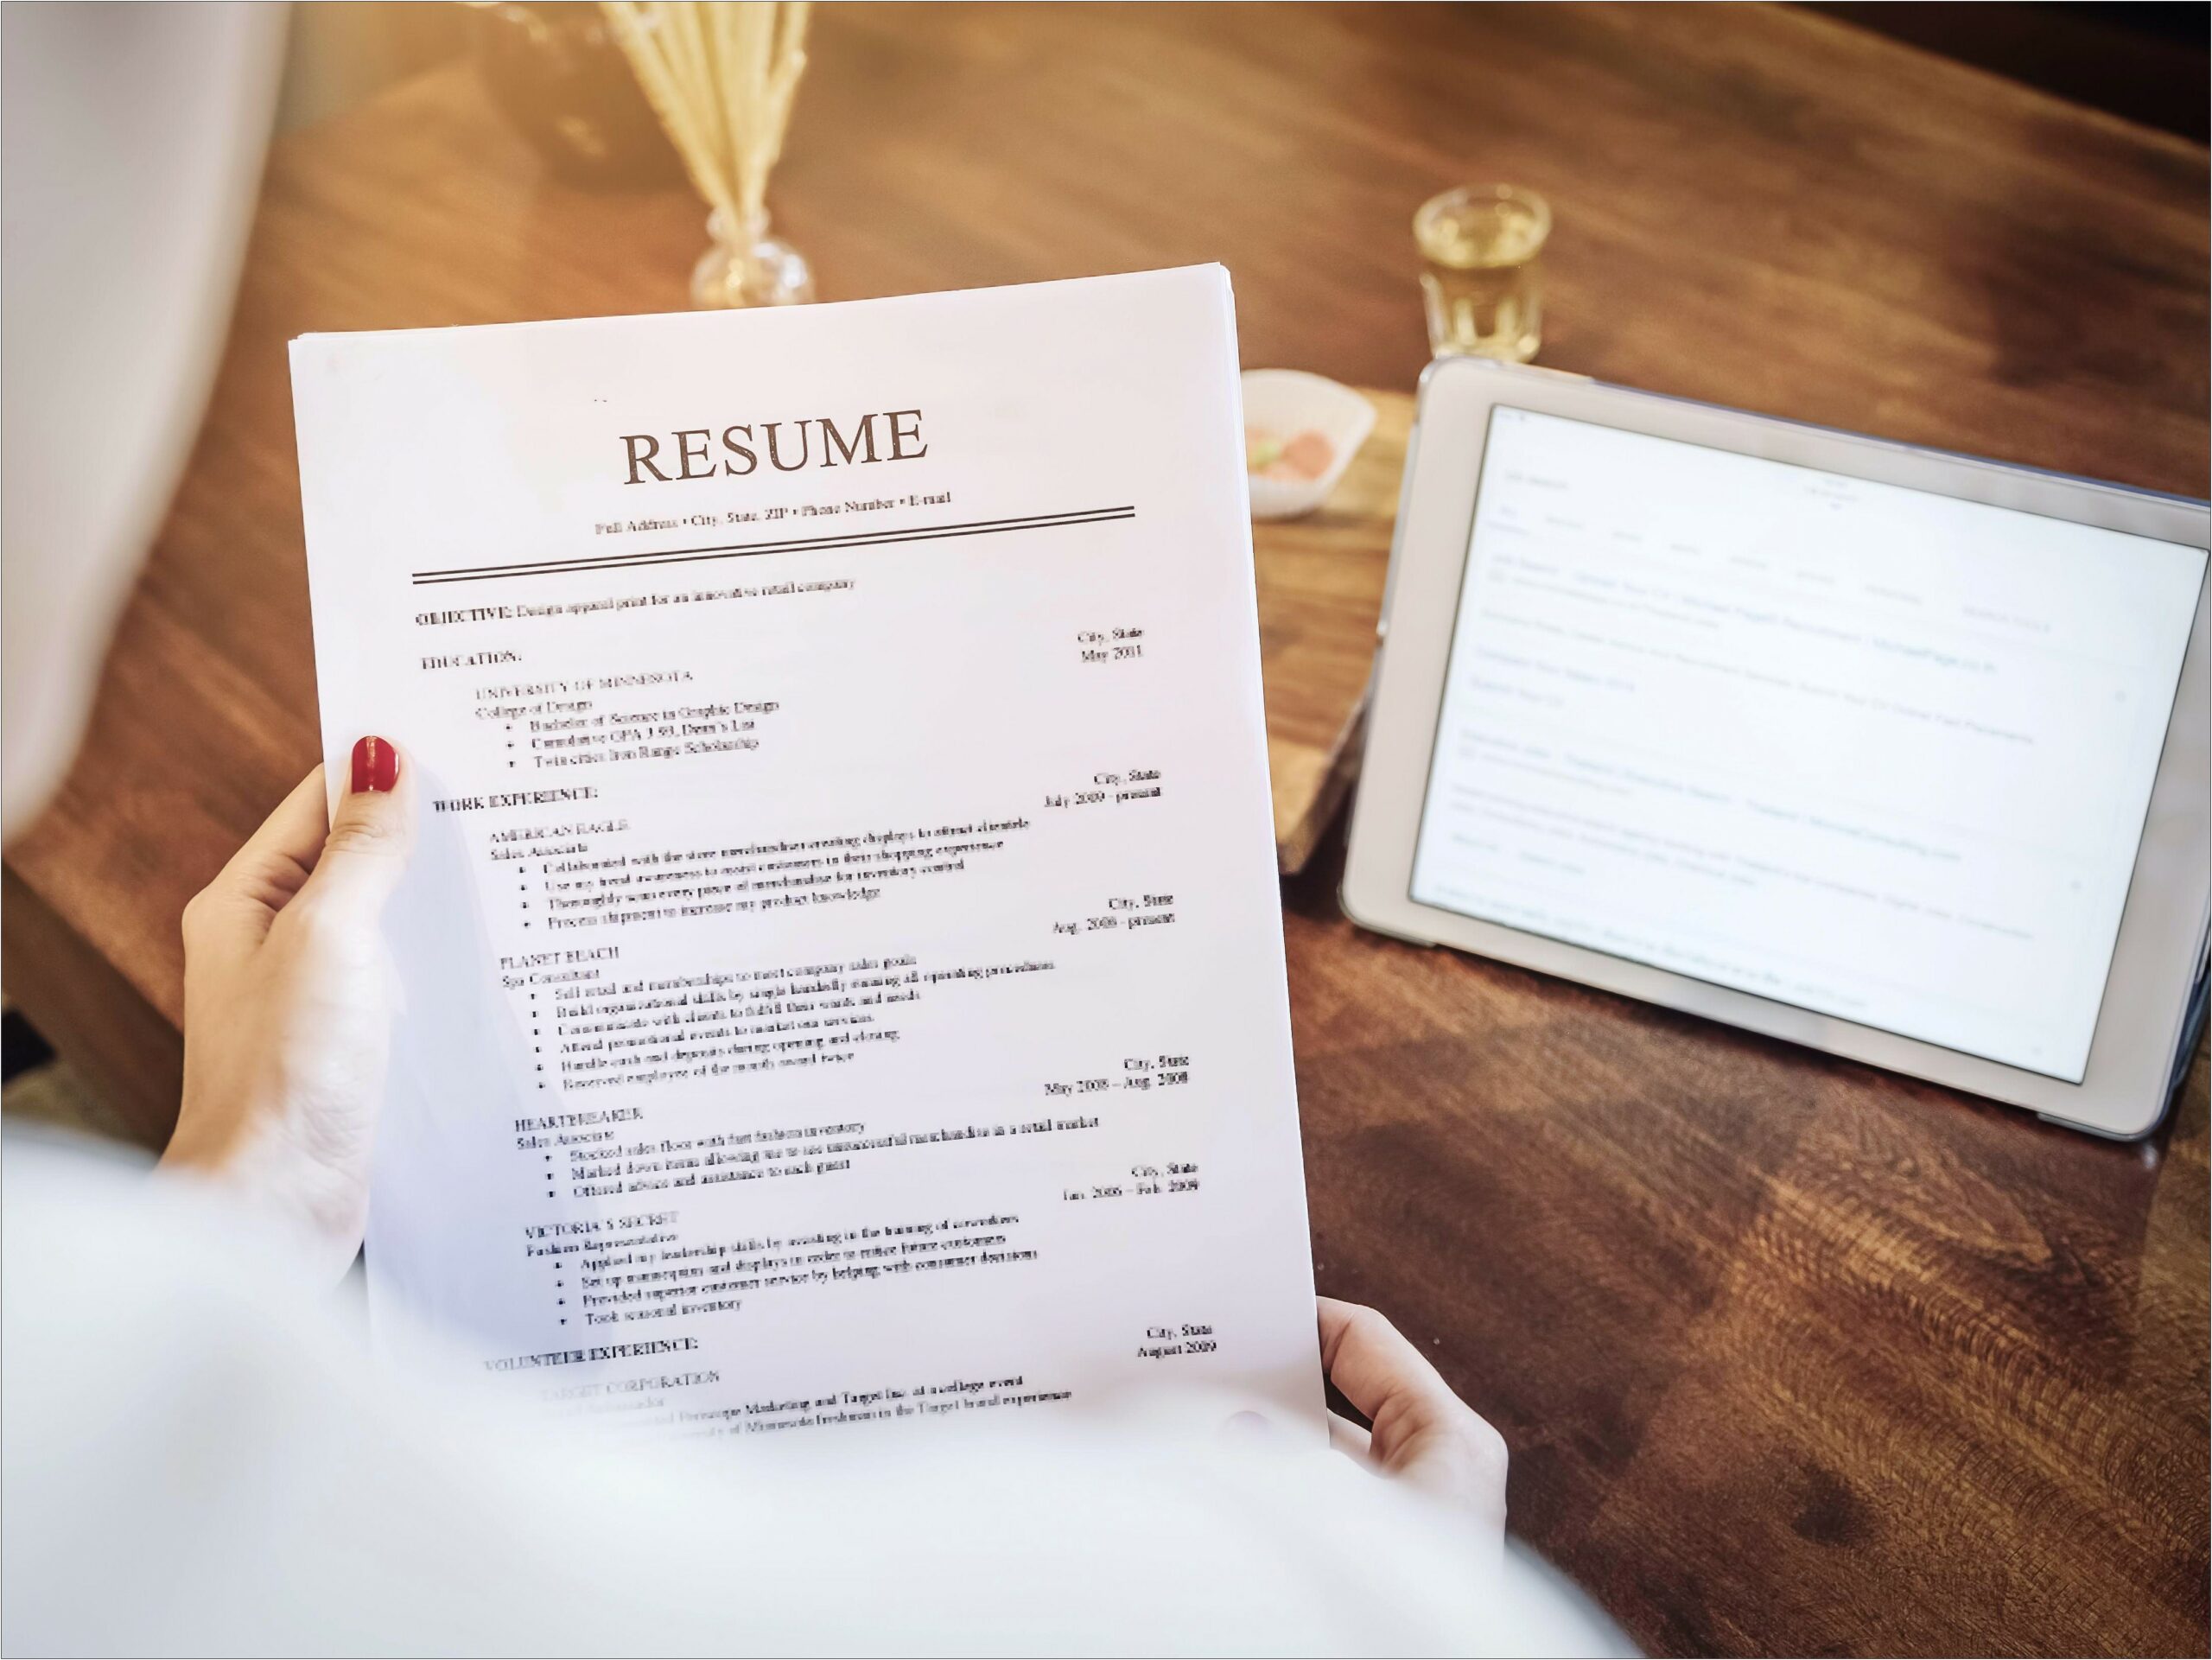 Can You Put Your Website On Your Resume